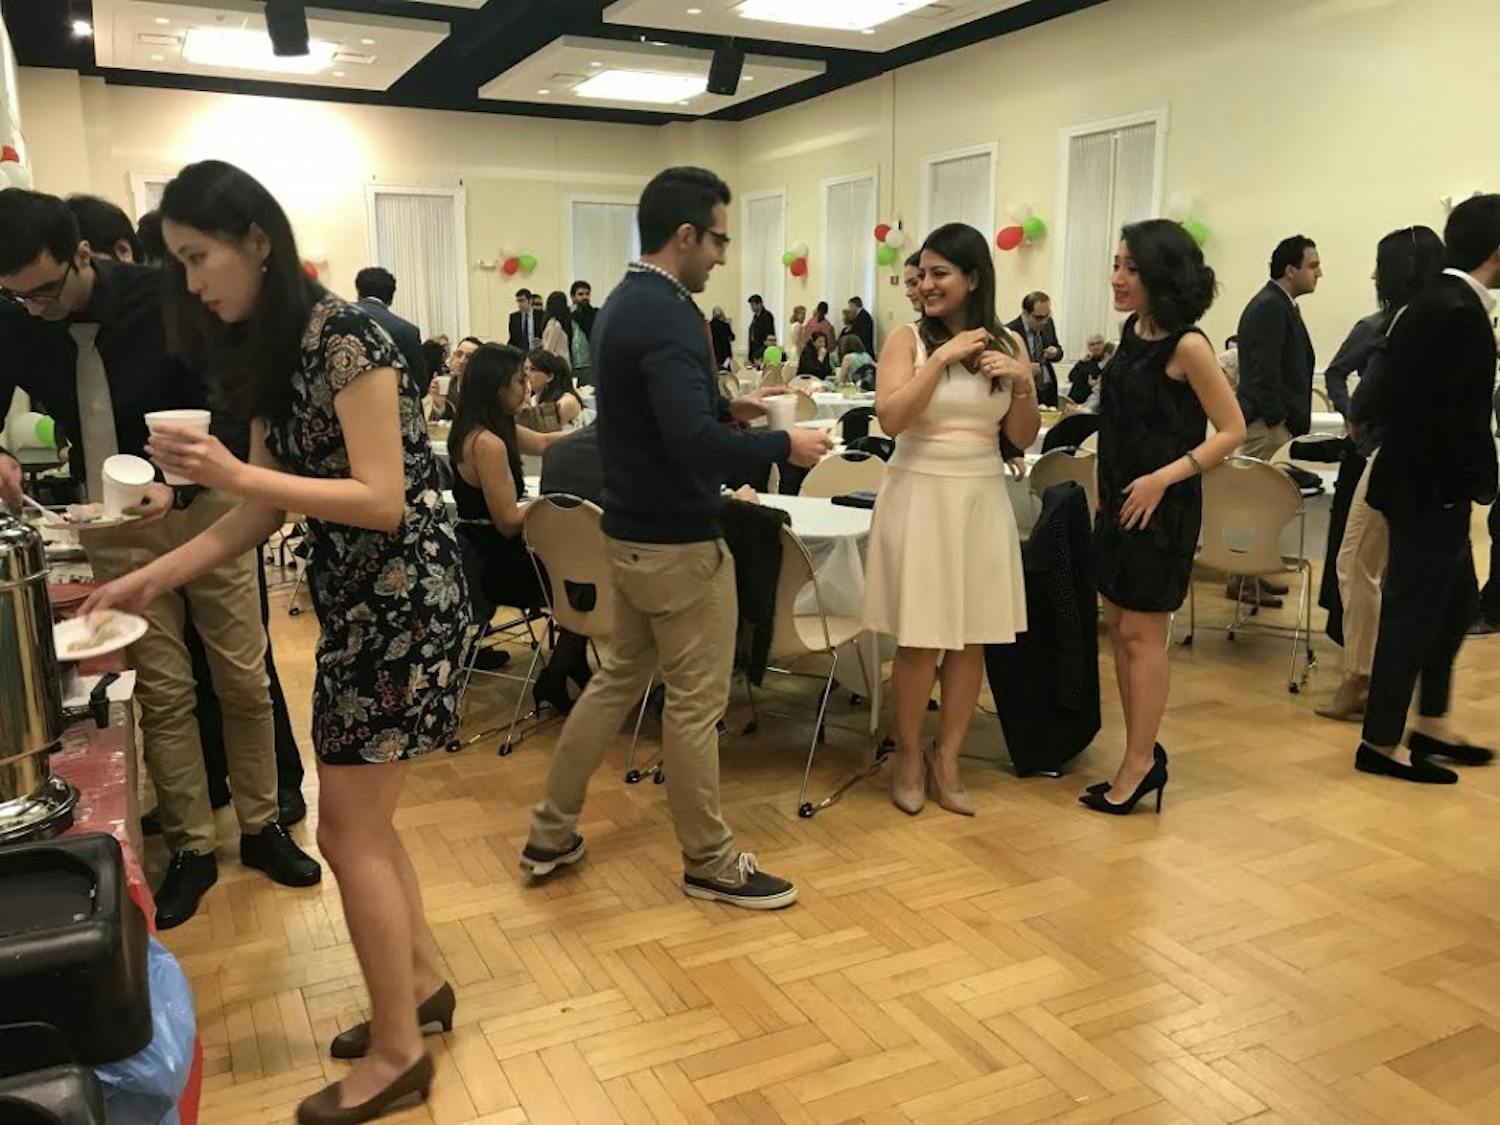 Students and Buffalo community members gathered in Harriman Hall on Saturday evening to celebrate Nowruz, the Persian New Year. Attendees said the event helped them feel more connected with their culture and less homesick.&nbsp;